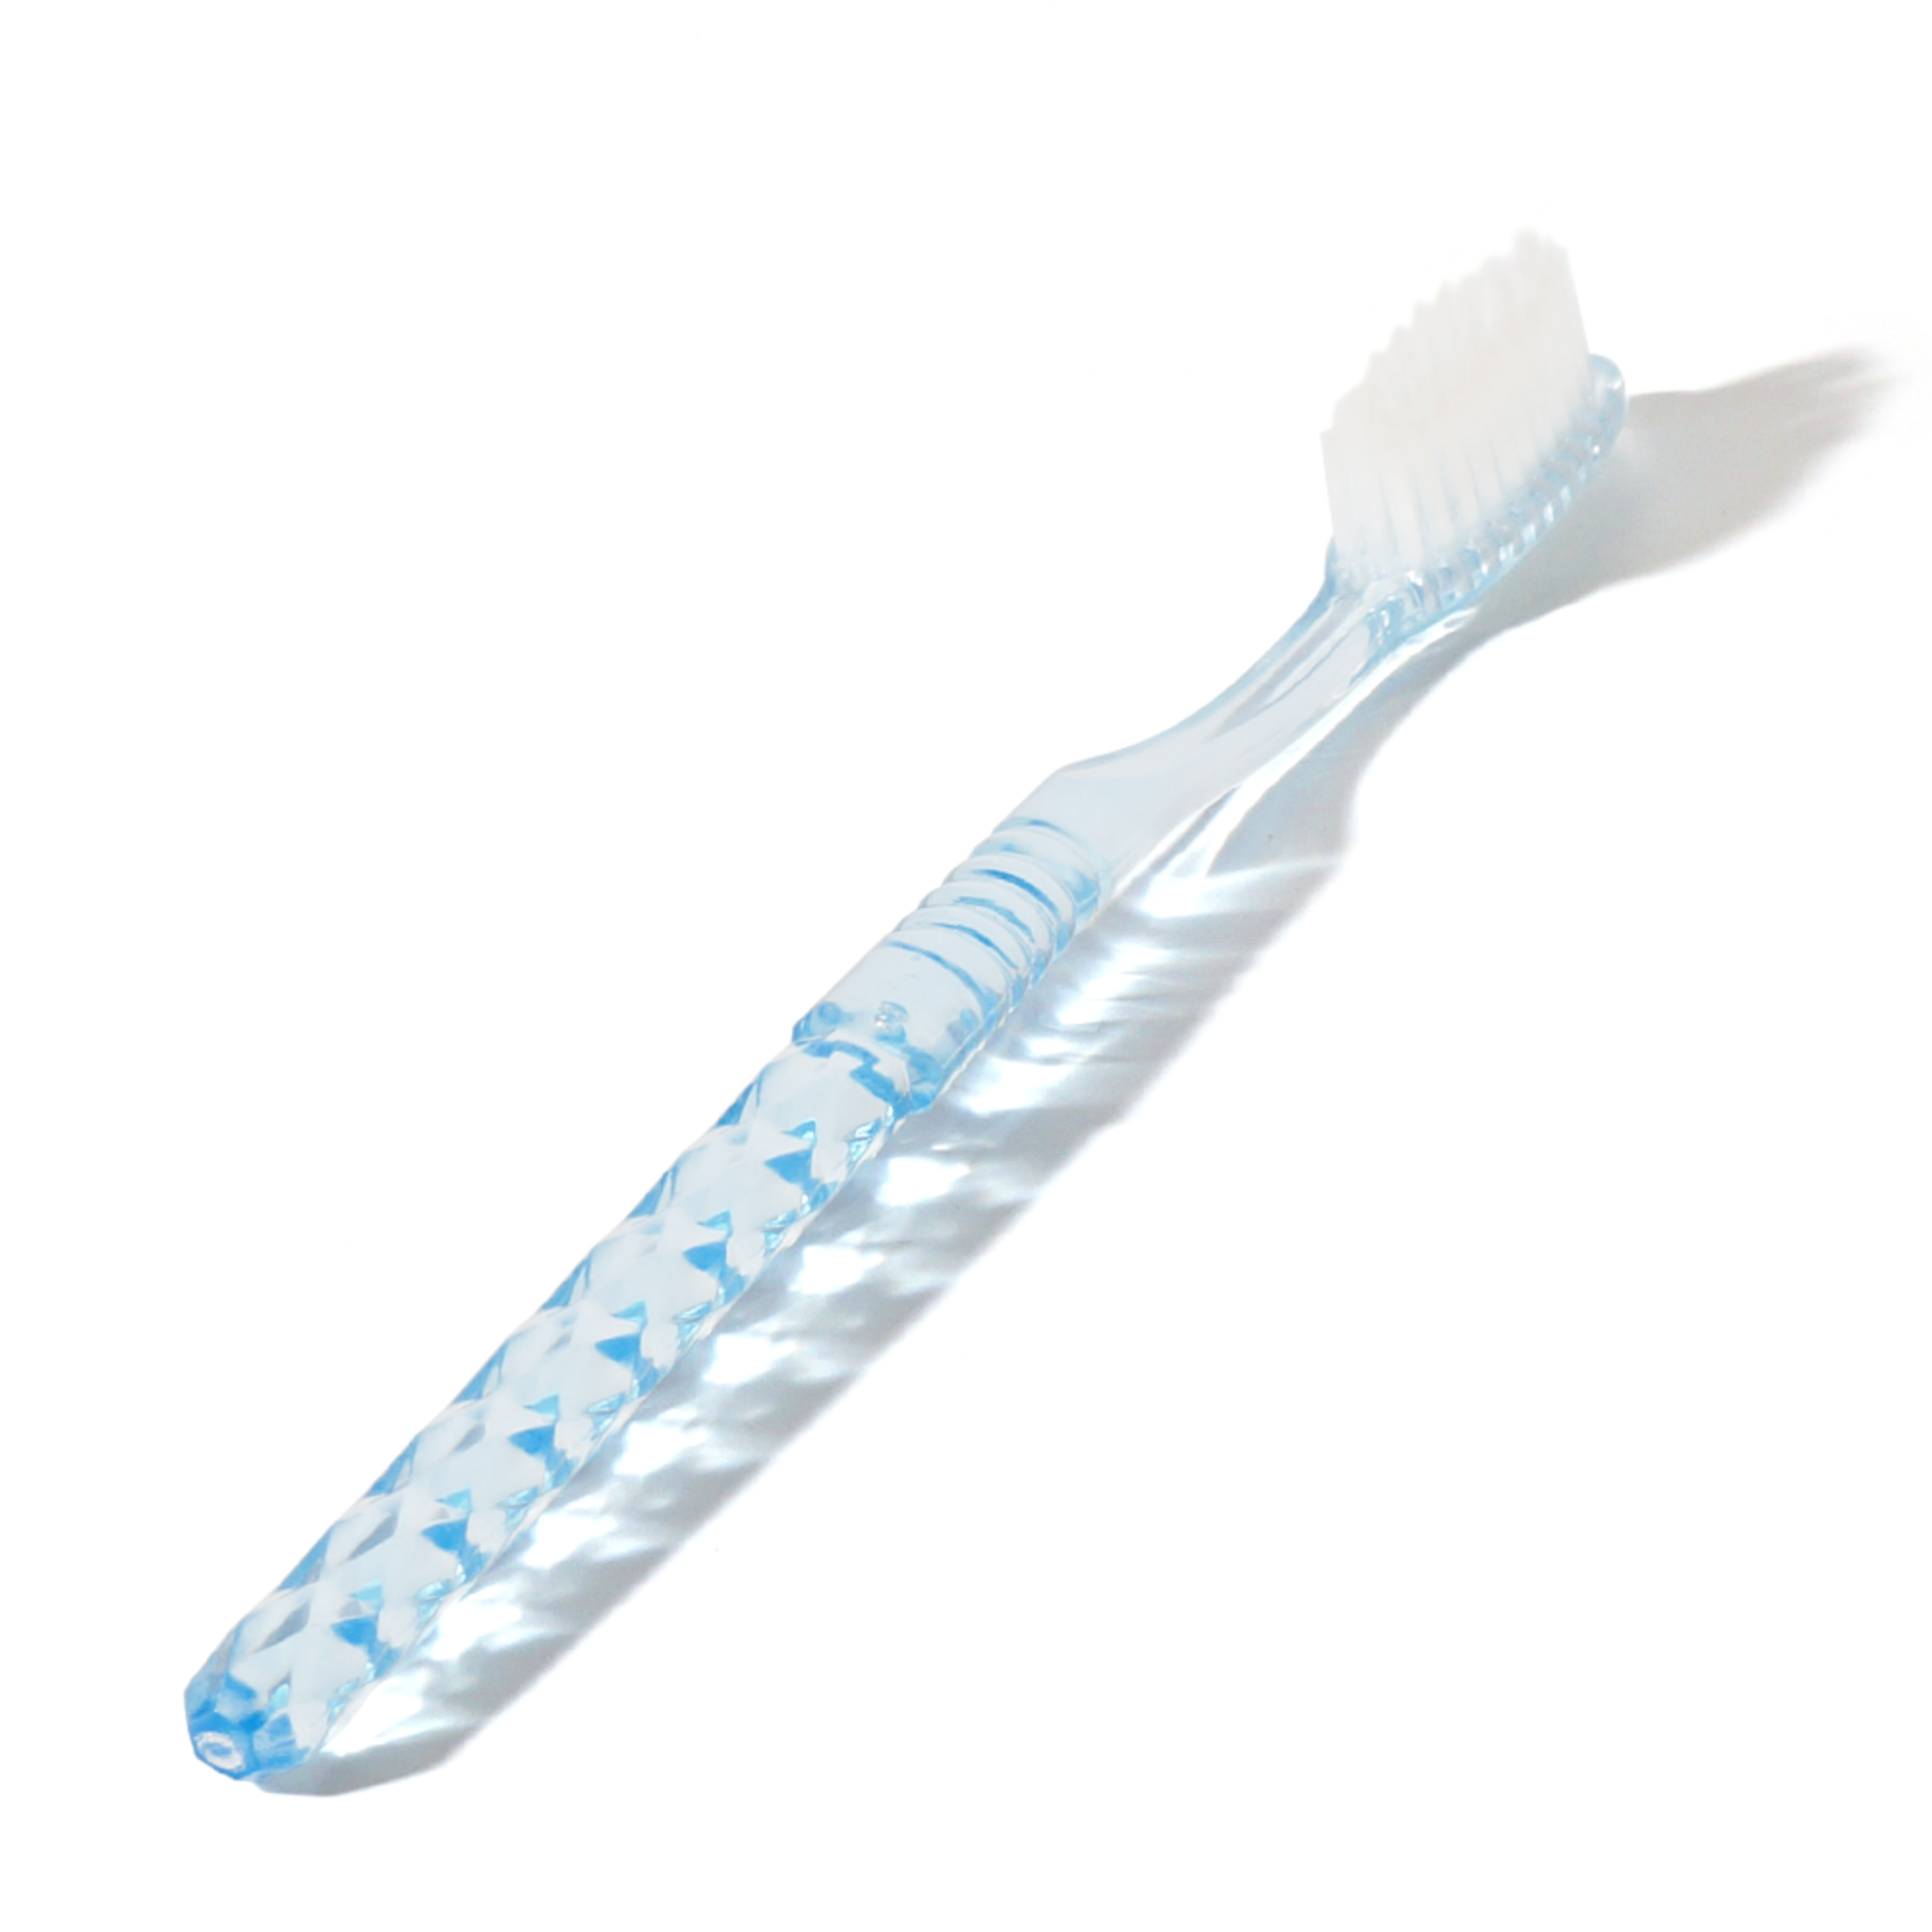 Bathroom Supplies Plastic Handle Hotel Toothbrush And Toothpaste Hotel Supplies Dental Kit